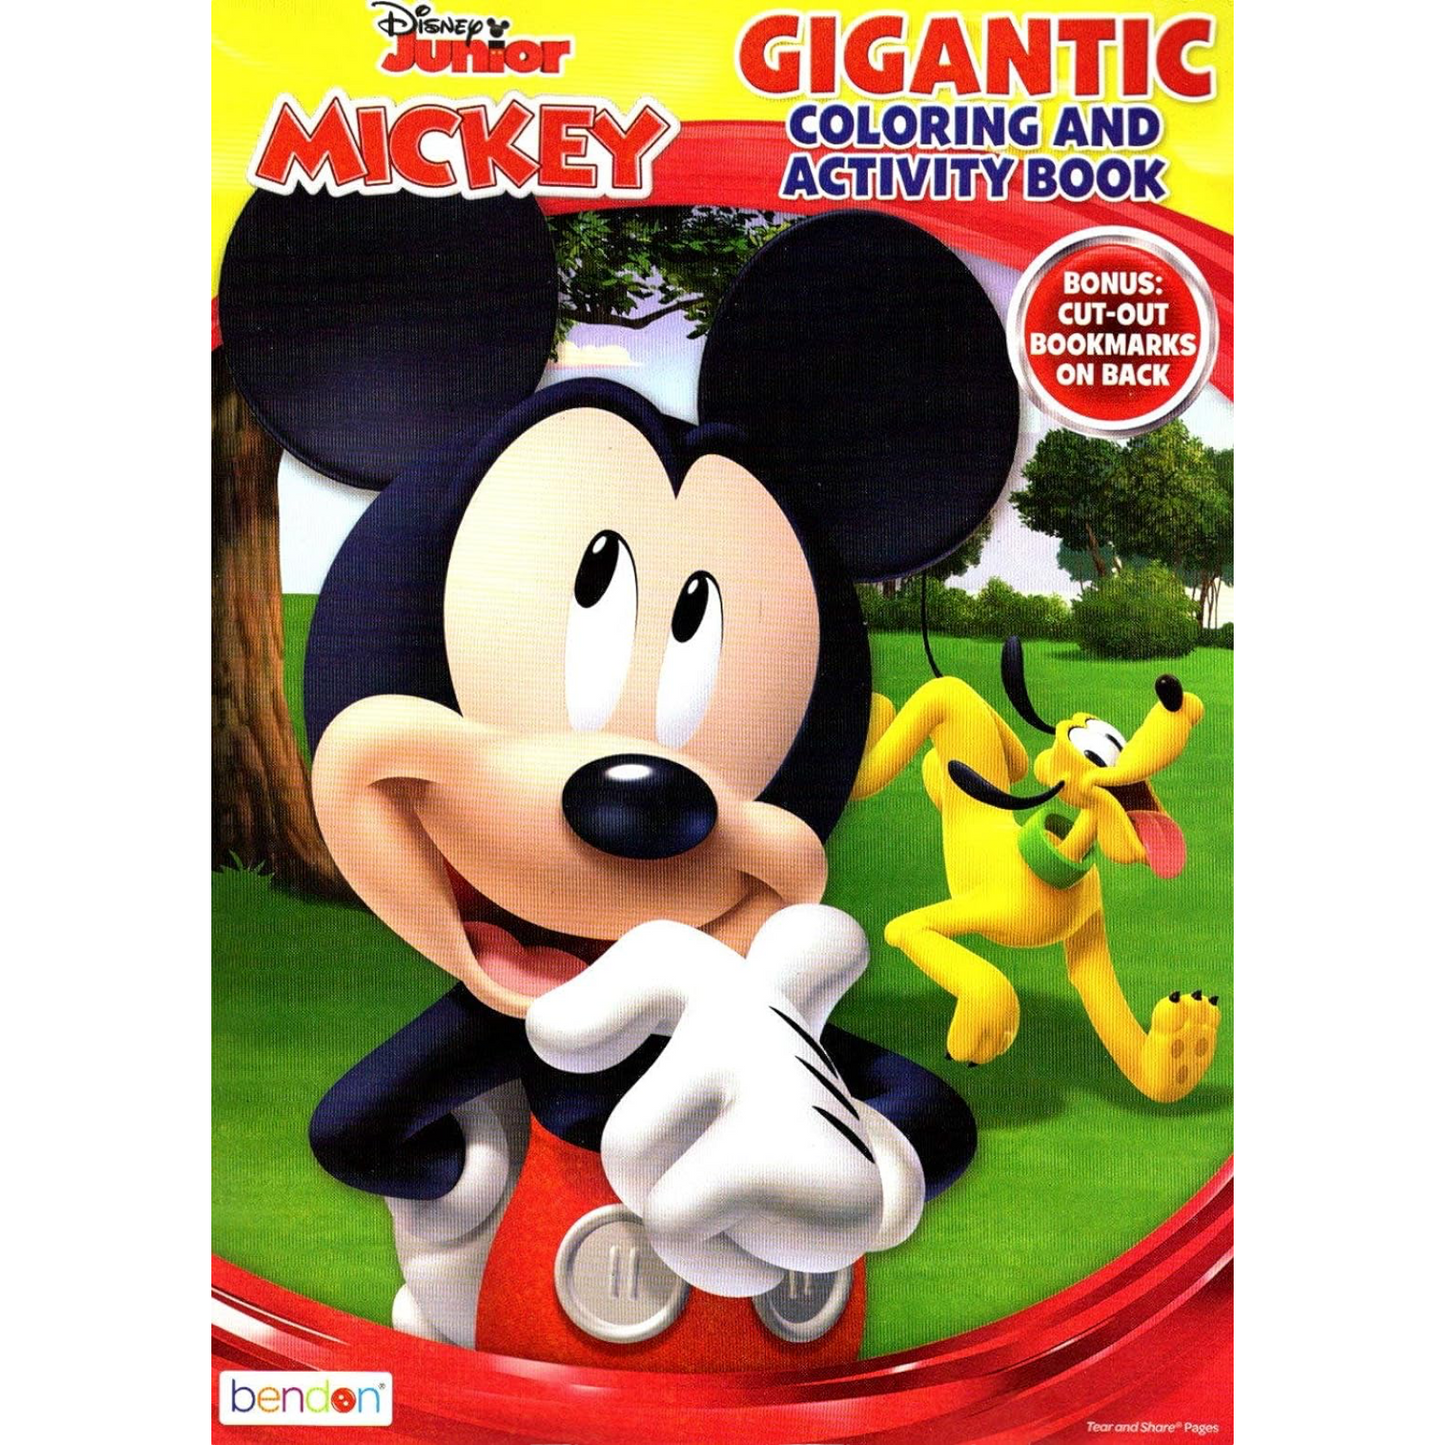 Mickey Mouse Gigantic Coloring and Activity Book - 192 Pages